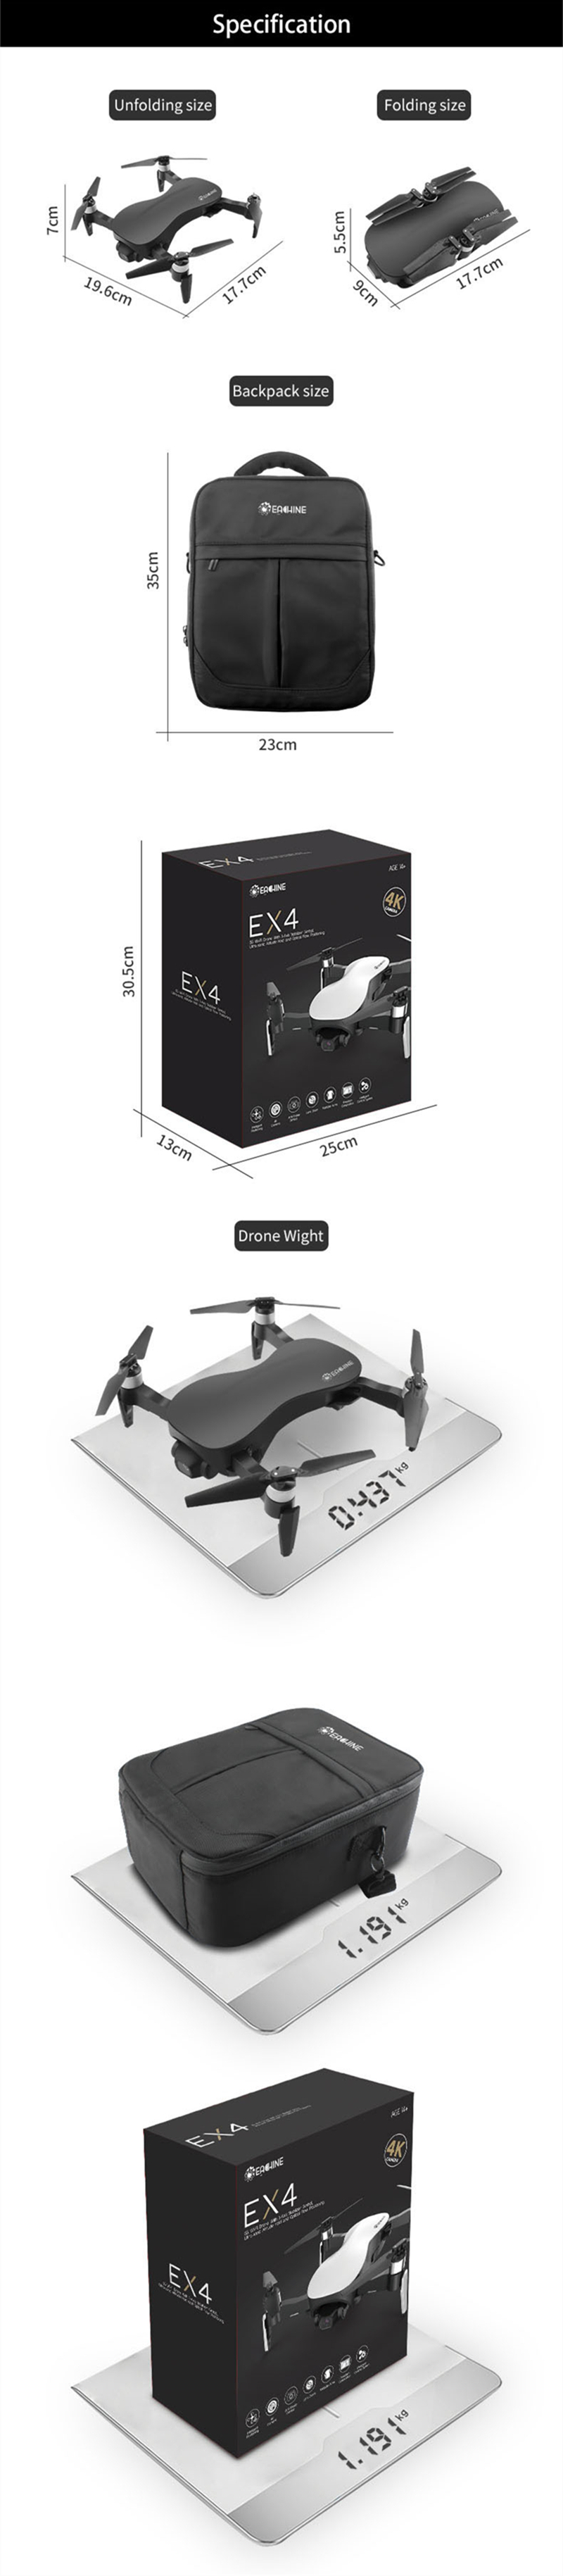 Eachine-EX4-PRO-5G-WIFI-3KM-FPV-GPS-With-4K-HD-Camera-3-Axis-Stable-Gimbal-25-Mins-Flight-Time-RC-Dr-1589424-8